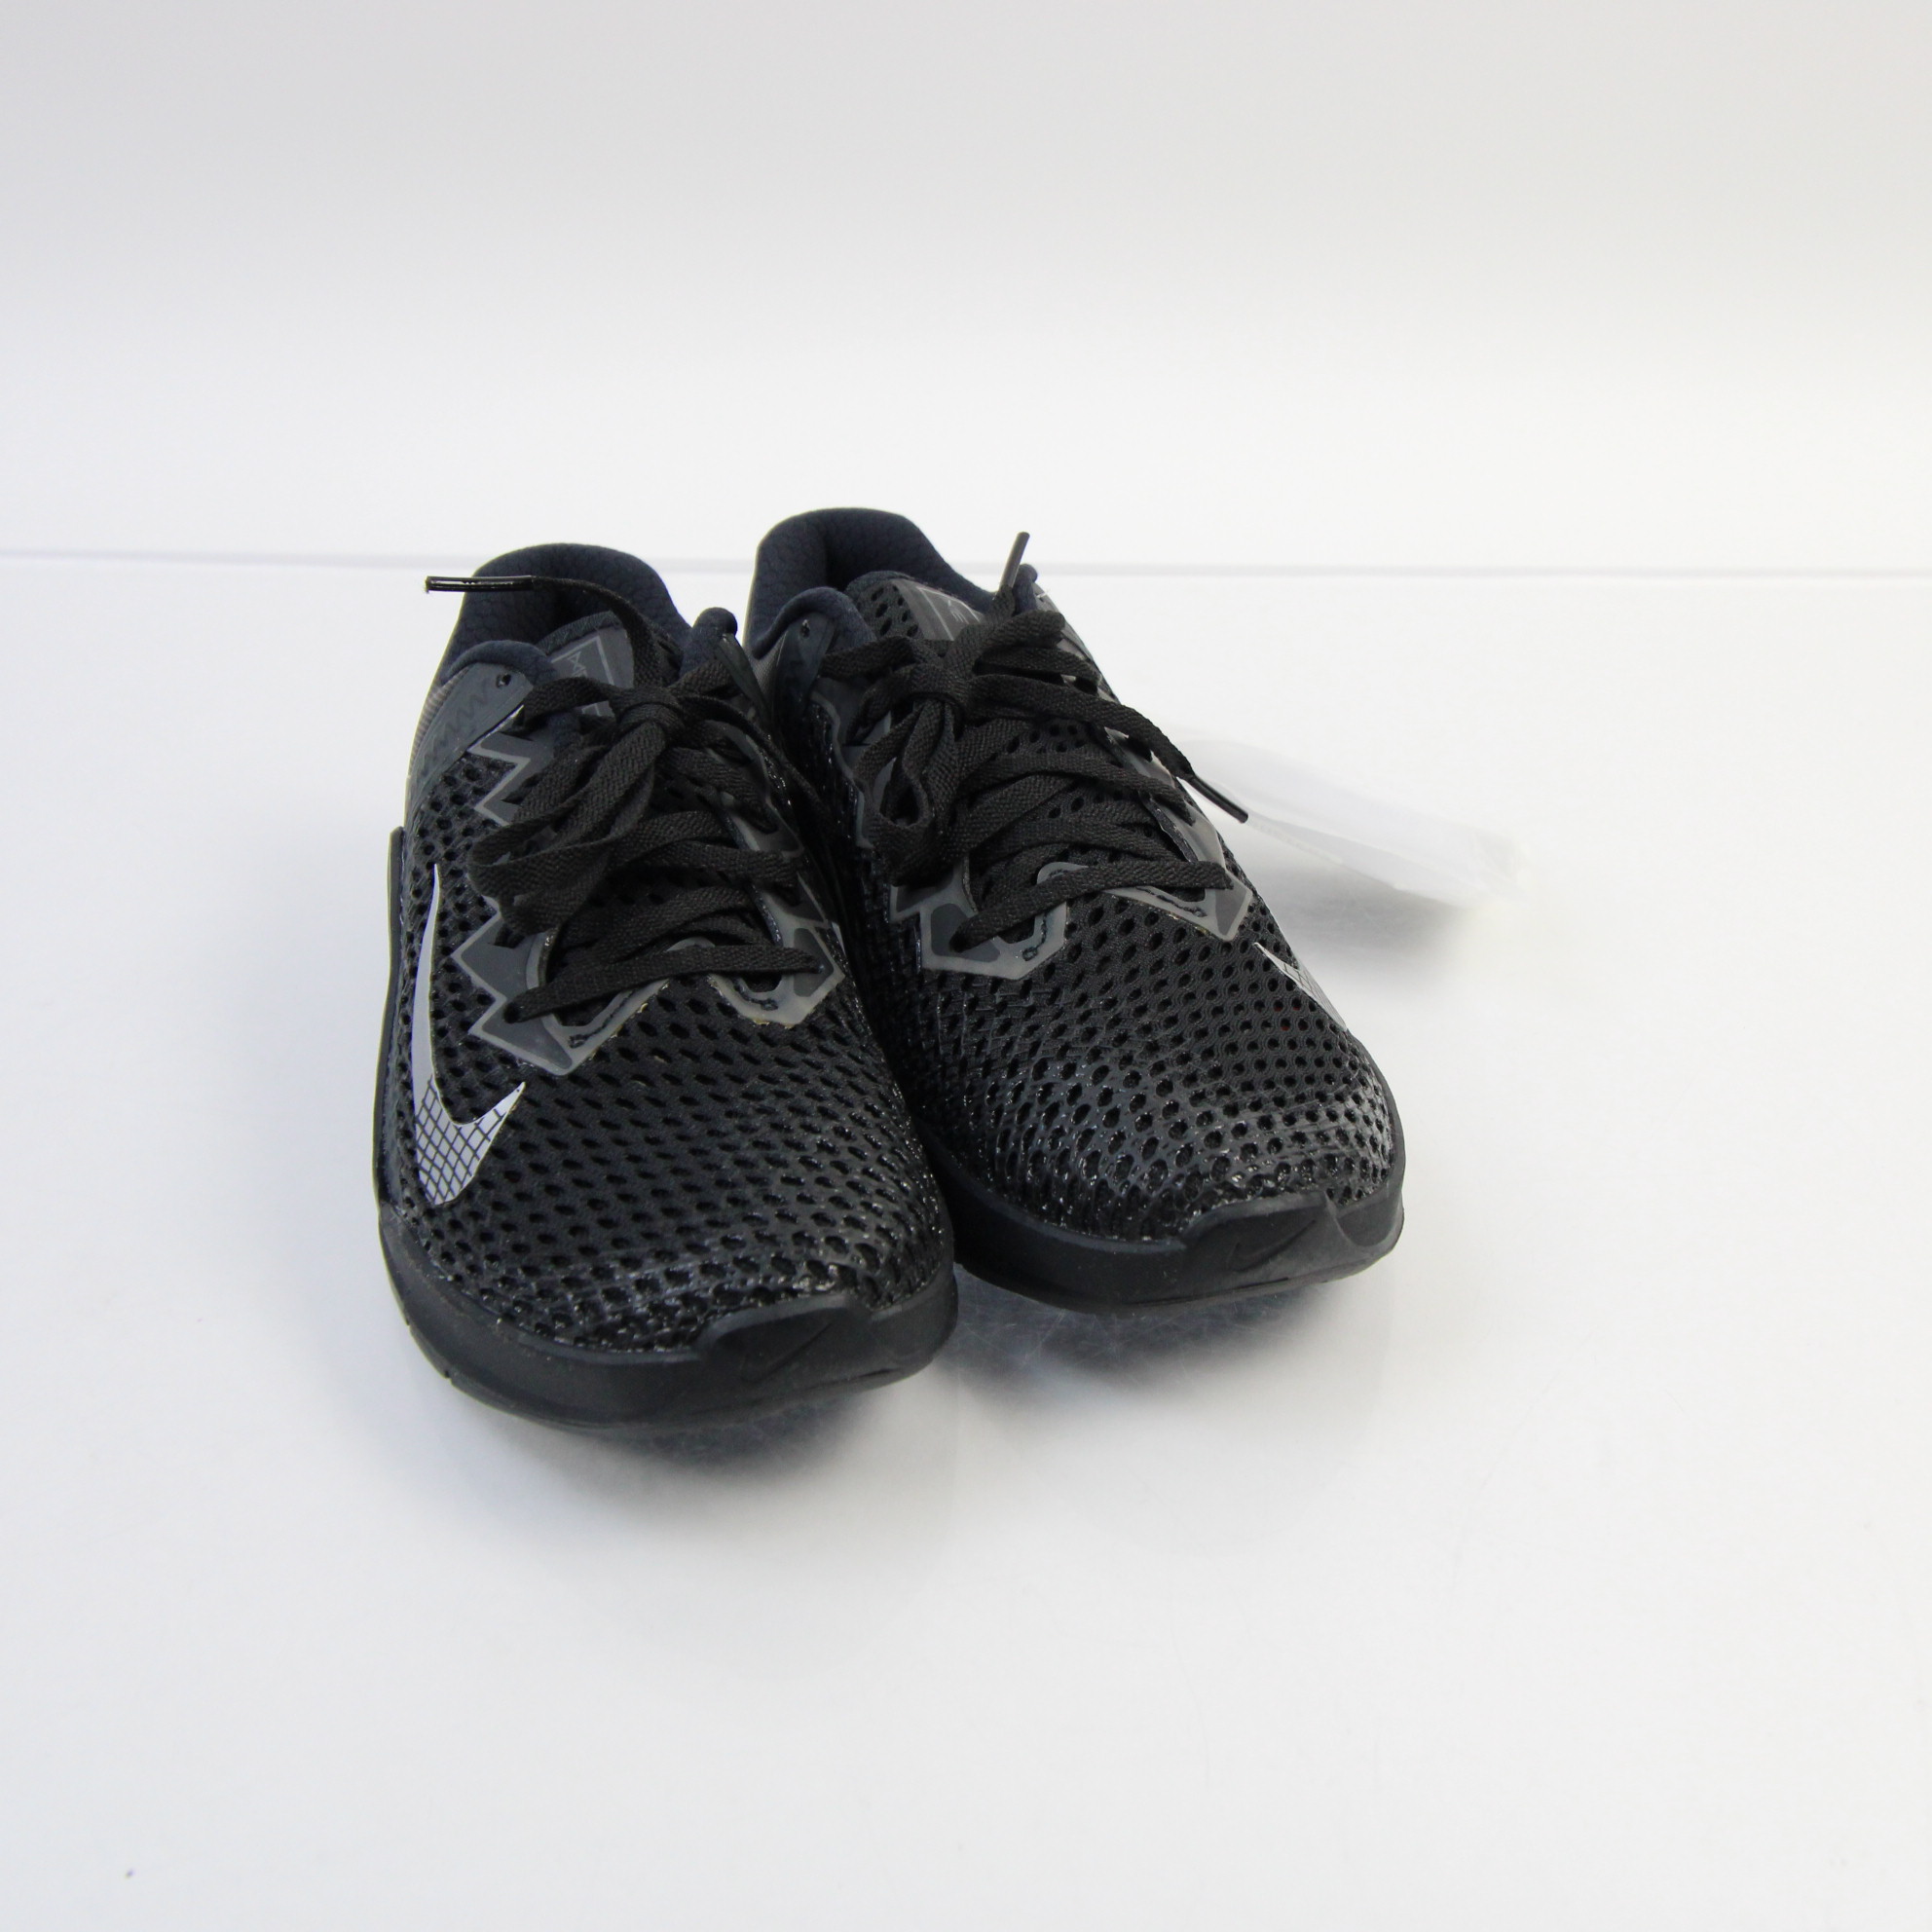 Nike Metcon Cross Training Shoes Men's Black New without Box